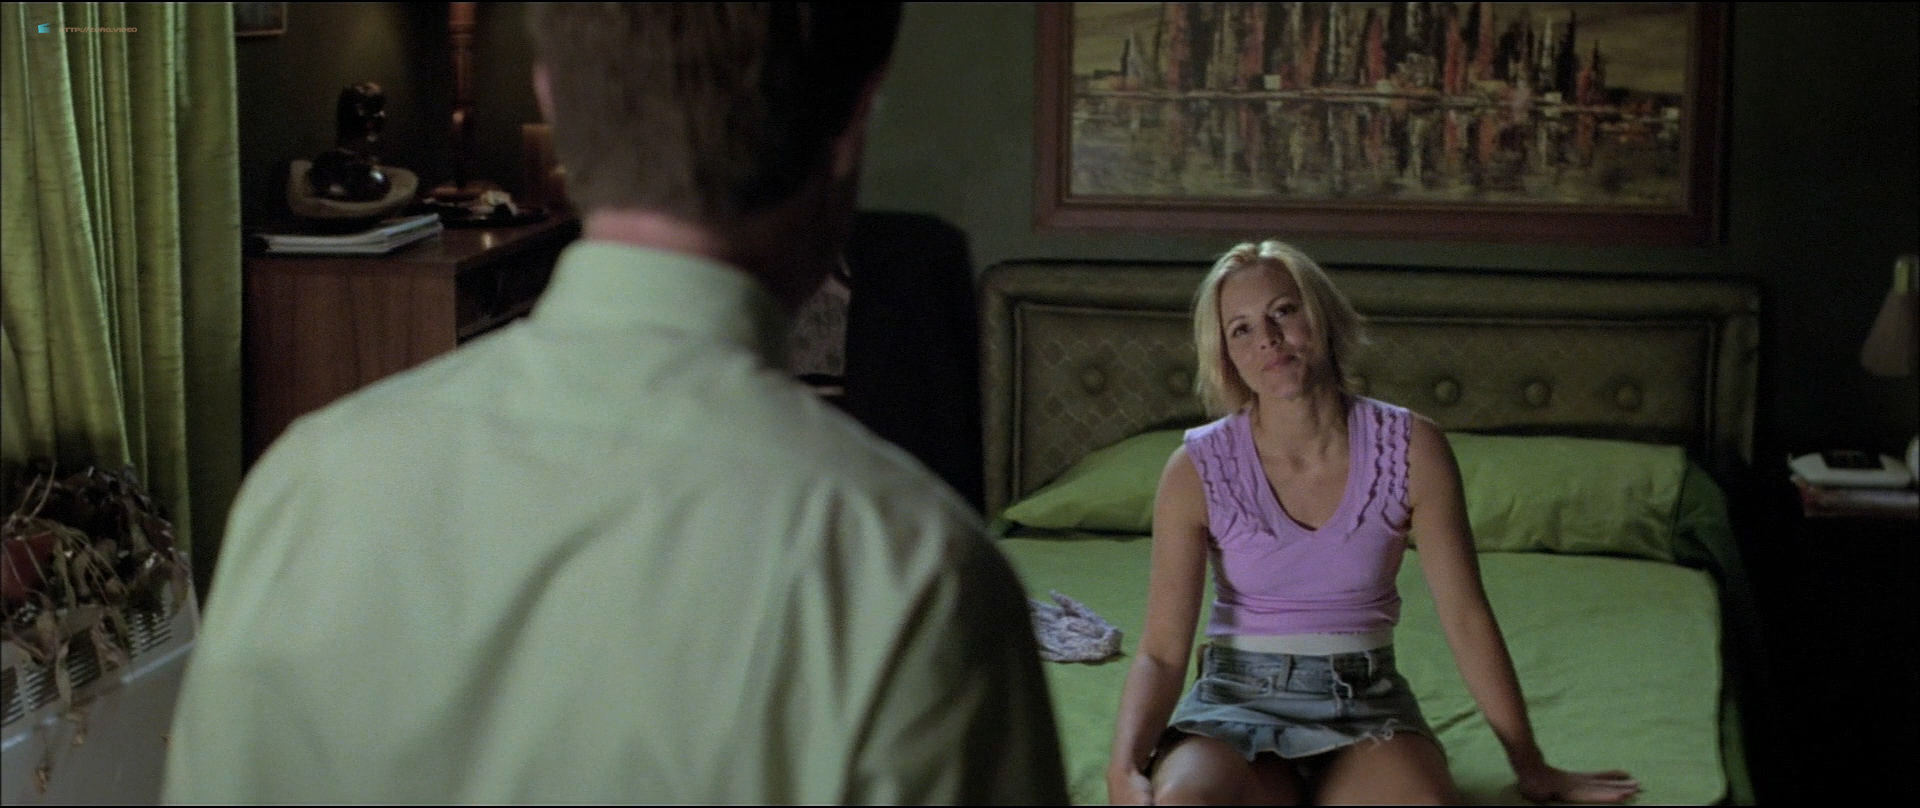 https://www.zorg.video/wp-content/uploads/2017/06/Maria-Bello-nude-topless-butt-bush-and-sex-The-Cooler-2003-HD-1080p-BluRay-002.jpg